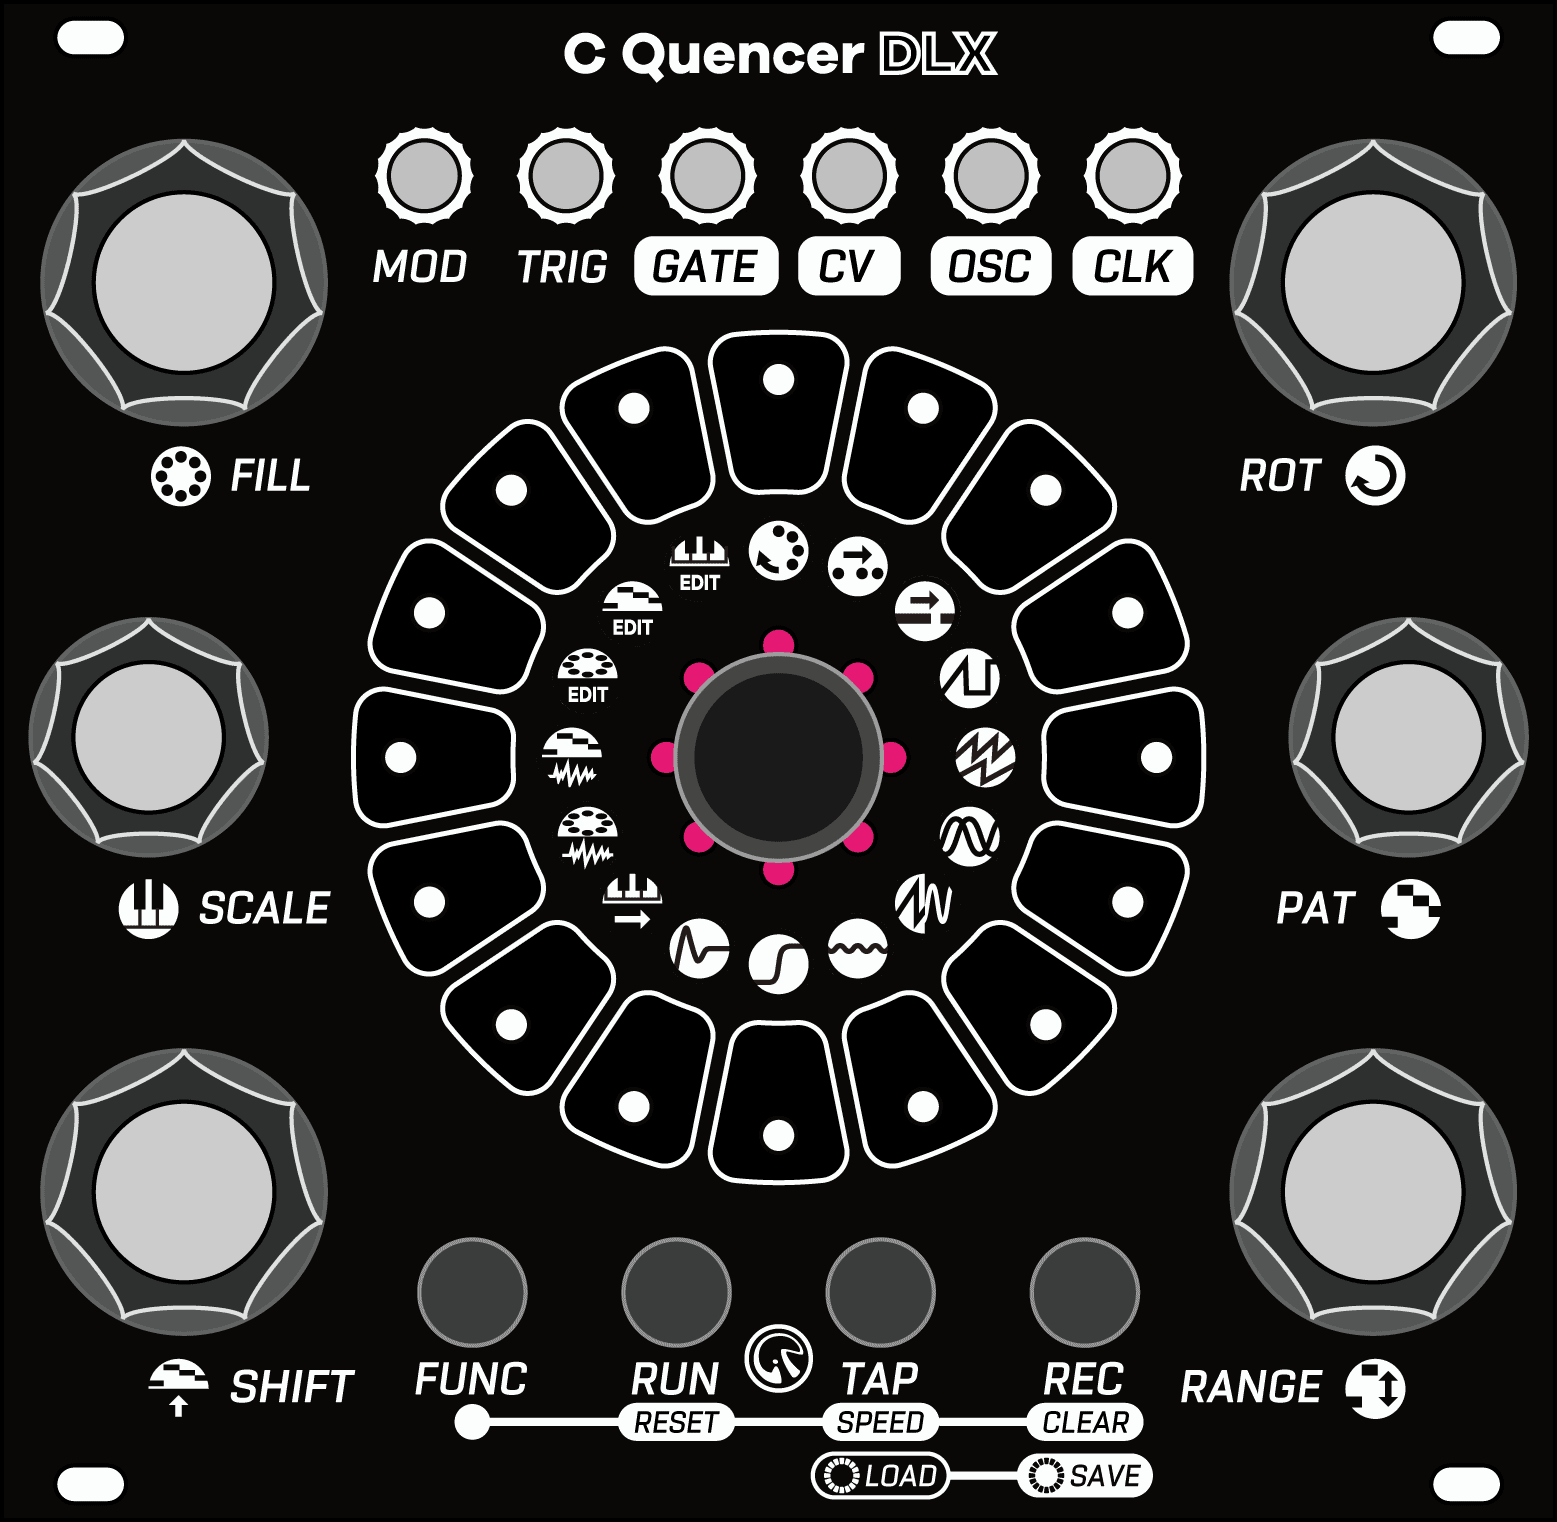 C Quencer DLX Manual title